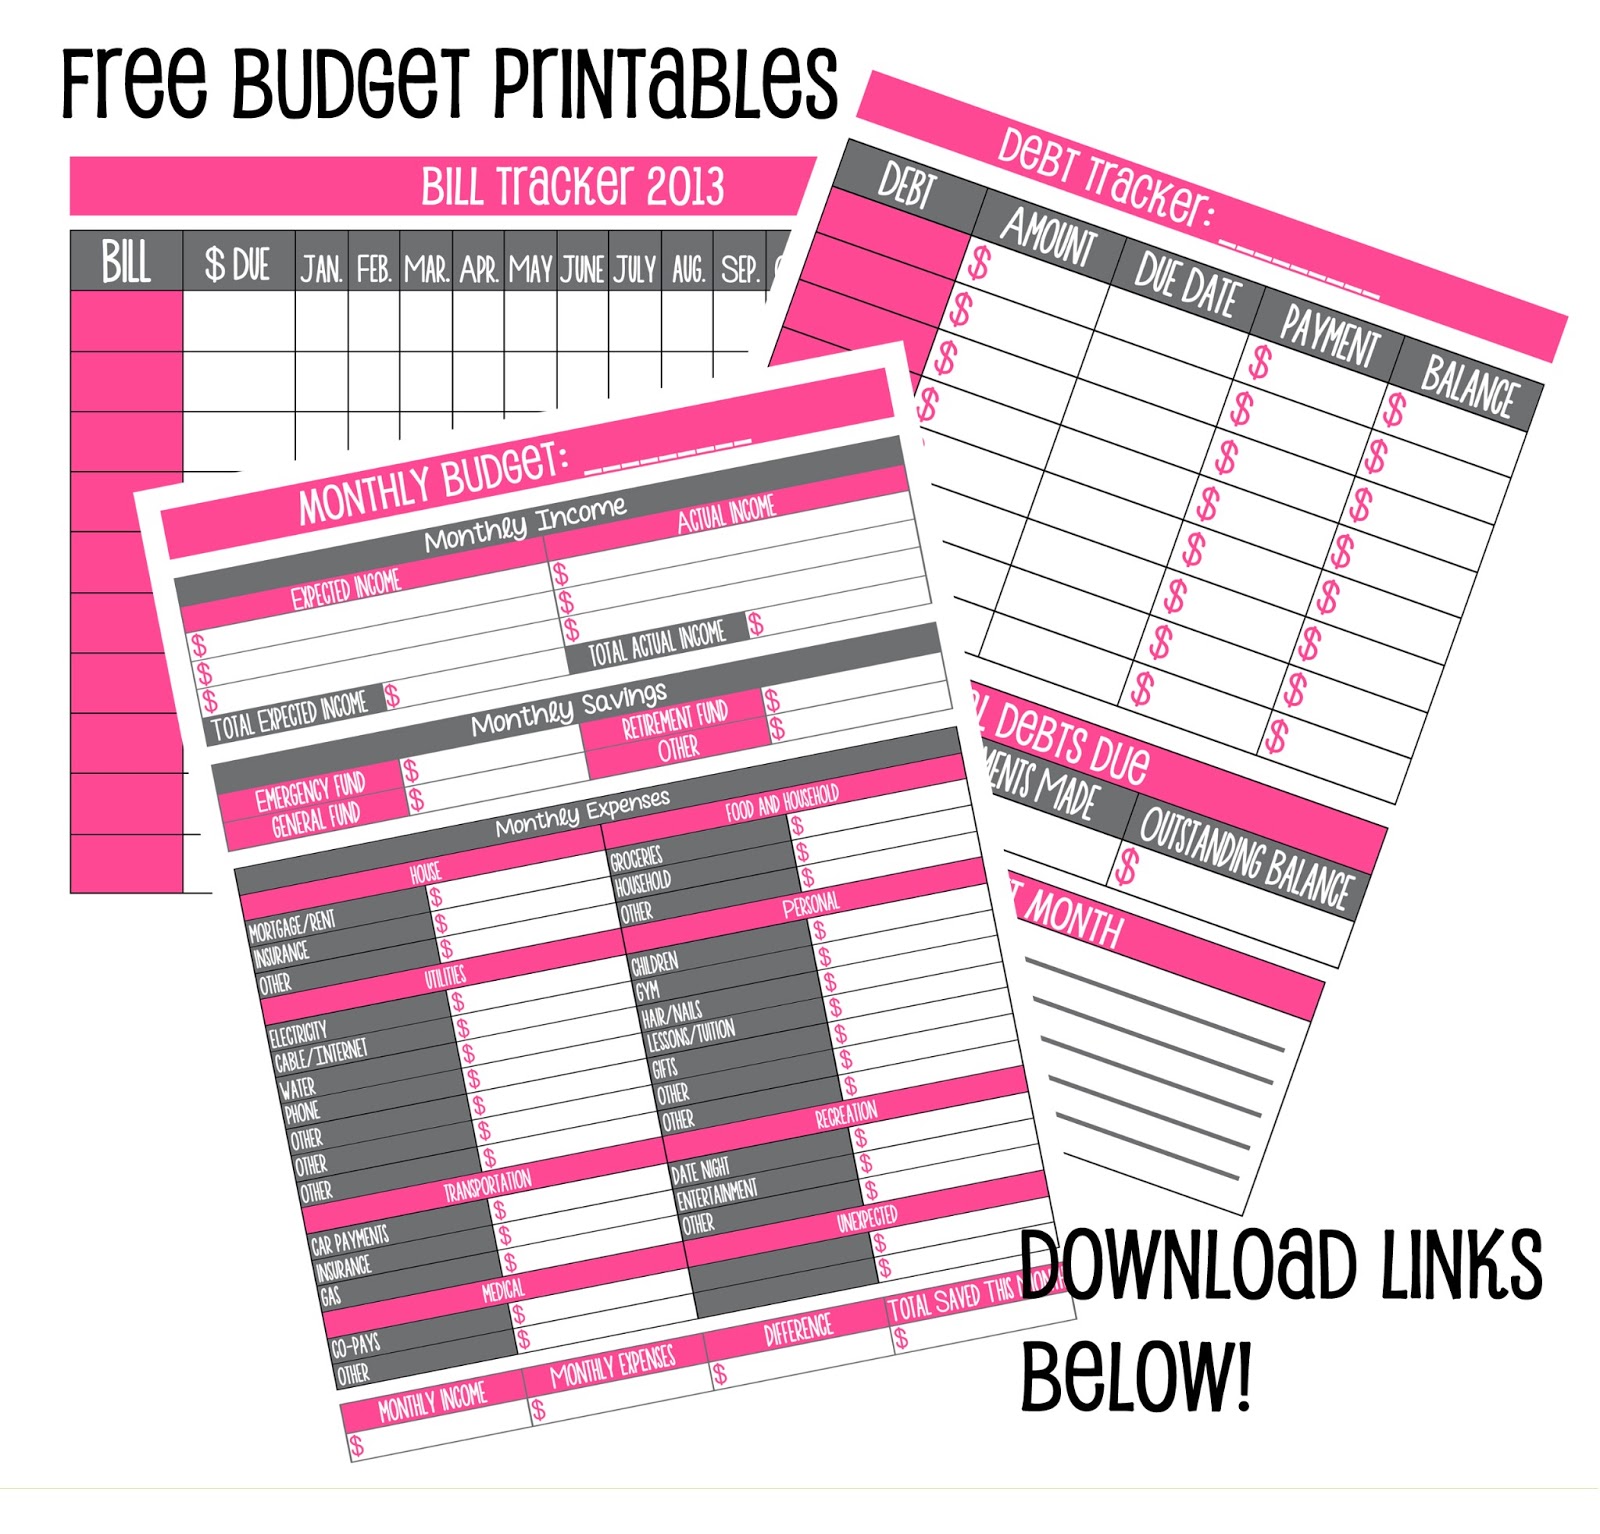 7 Best Images of Free Printable Weekly Budget Sheets Free Printable